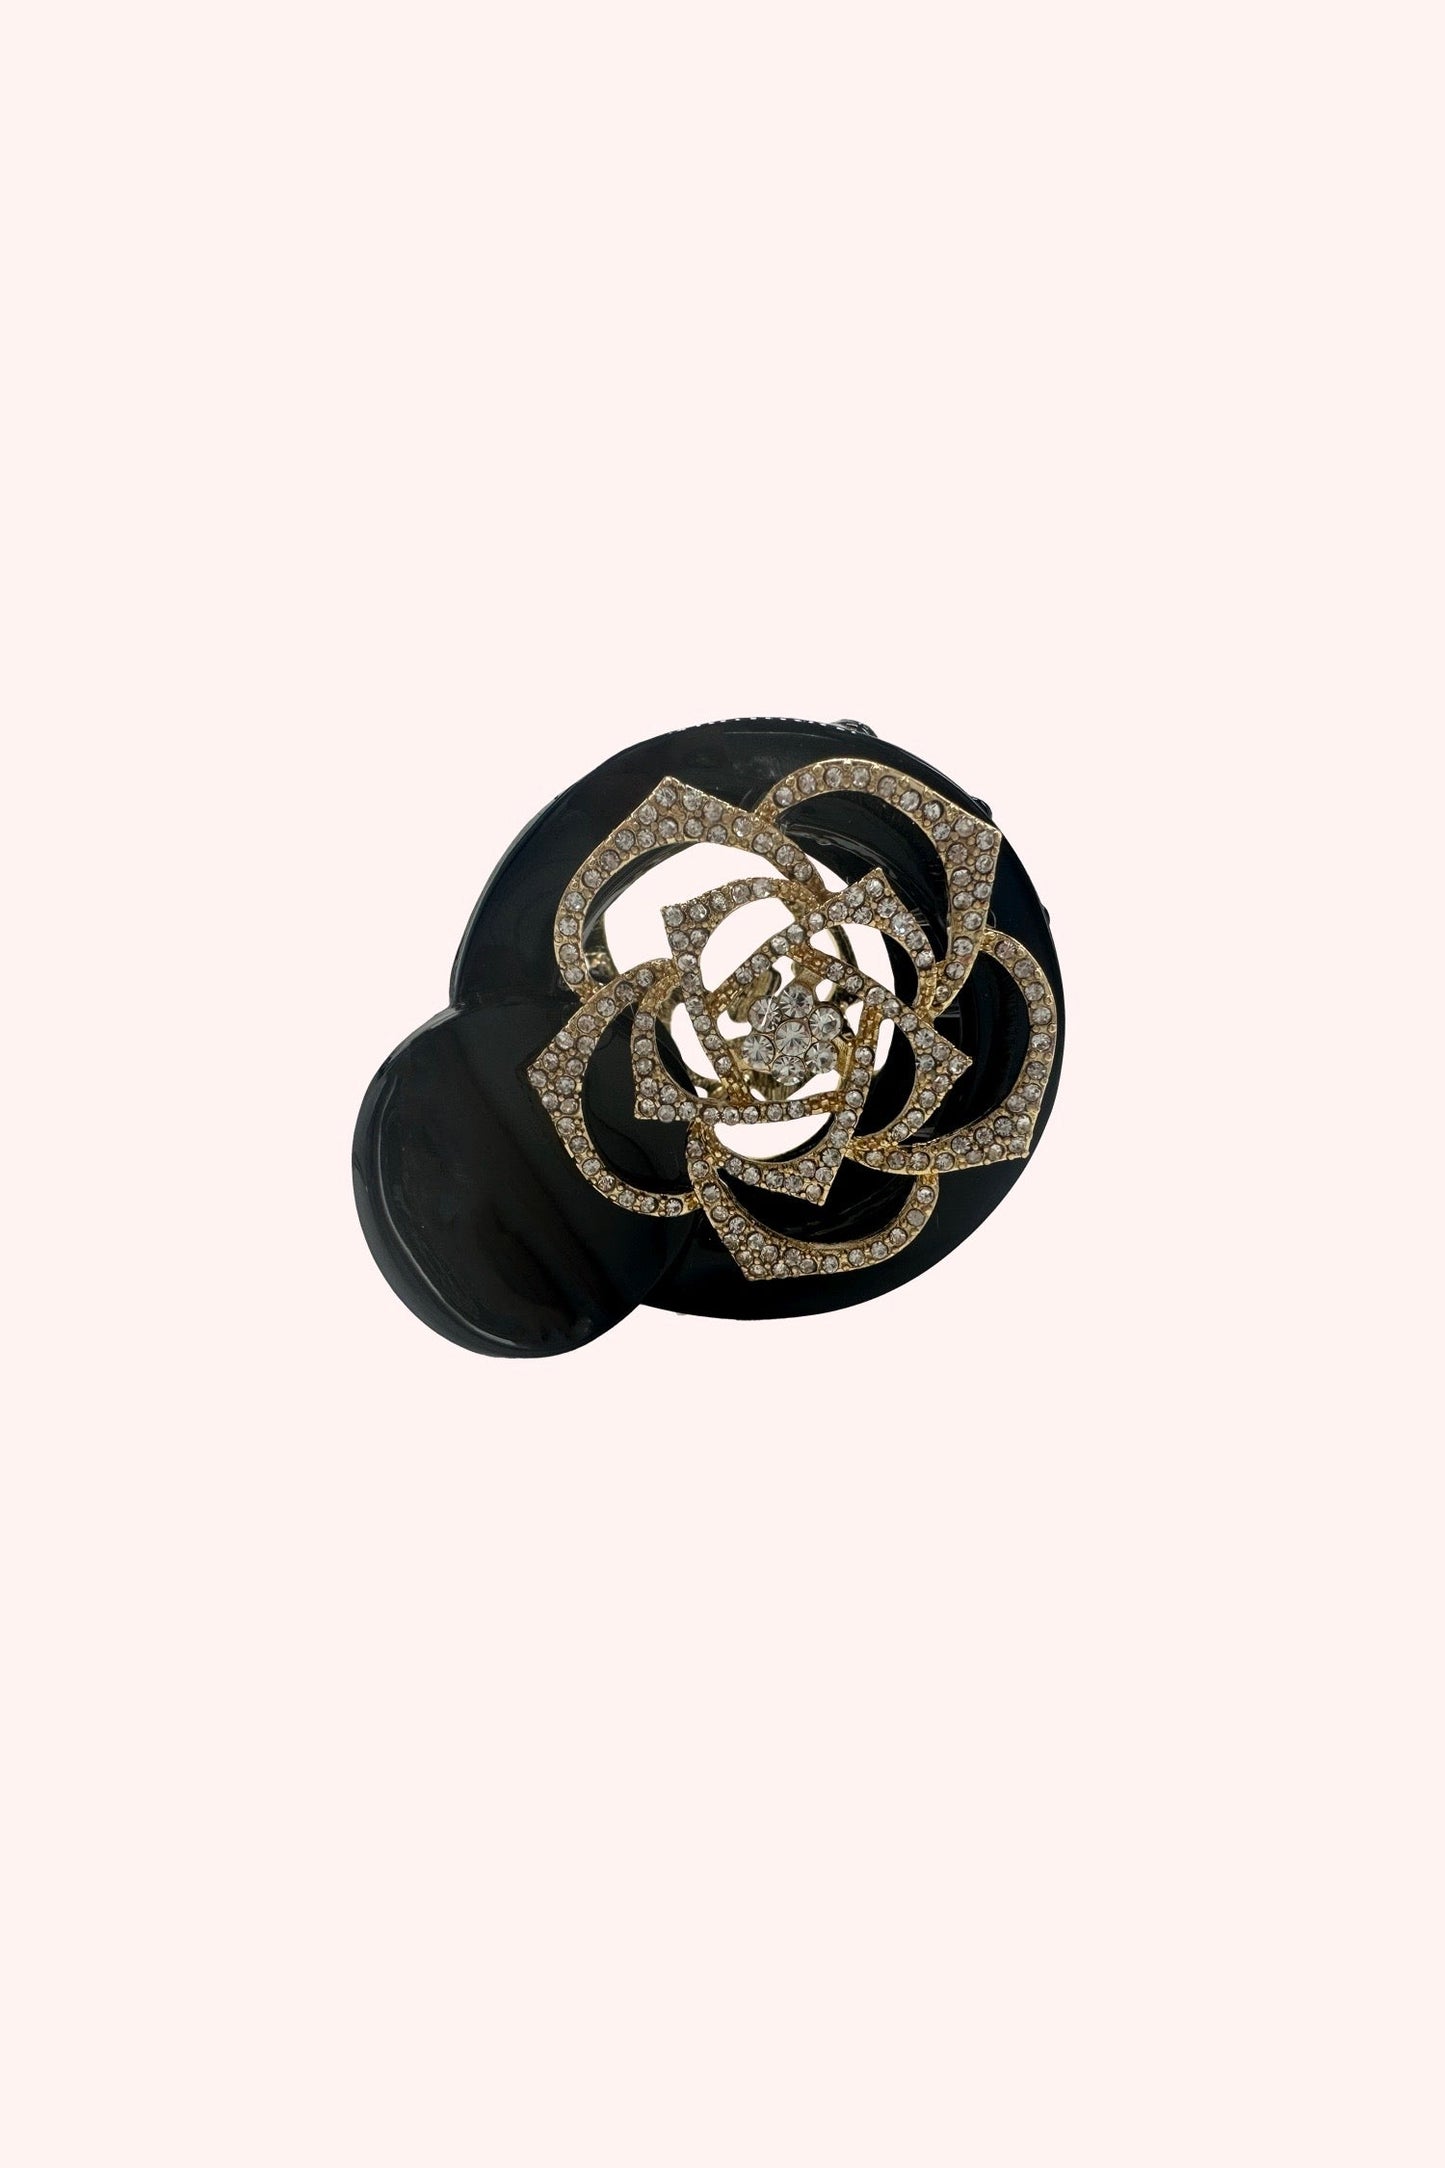 Stylized Gemstone Rose Claw Clip Black and Gold Accents with gems